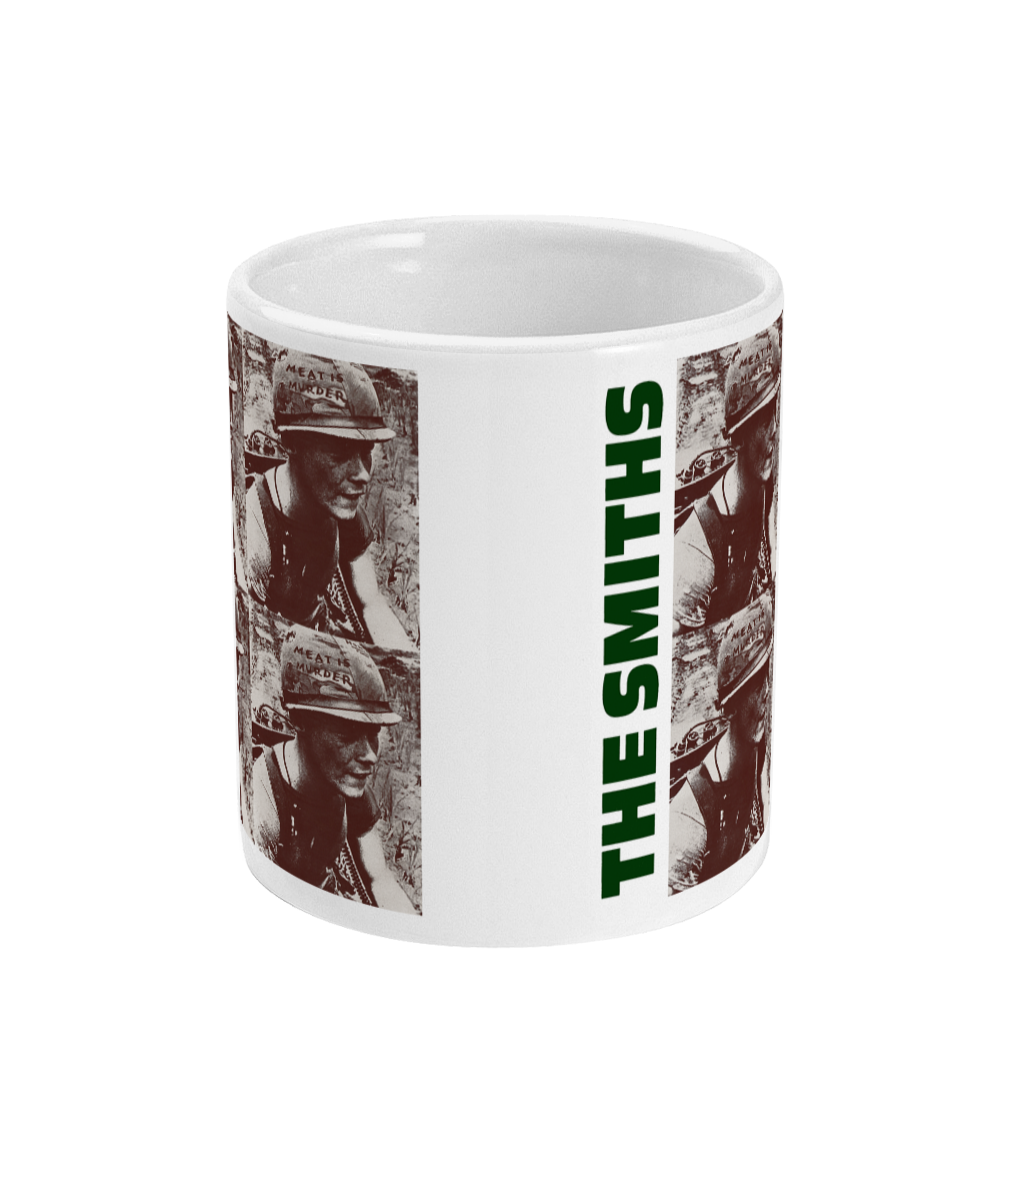 THE SMITHS - Meat Is Murder - 1985 - Mug